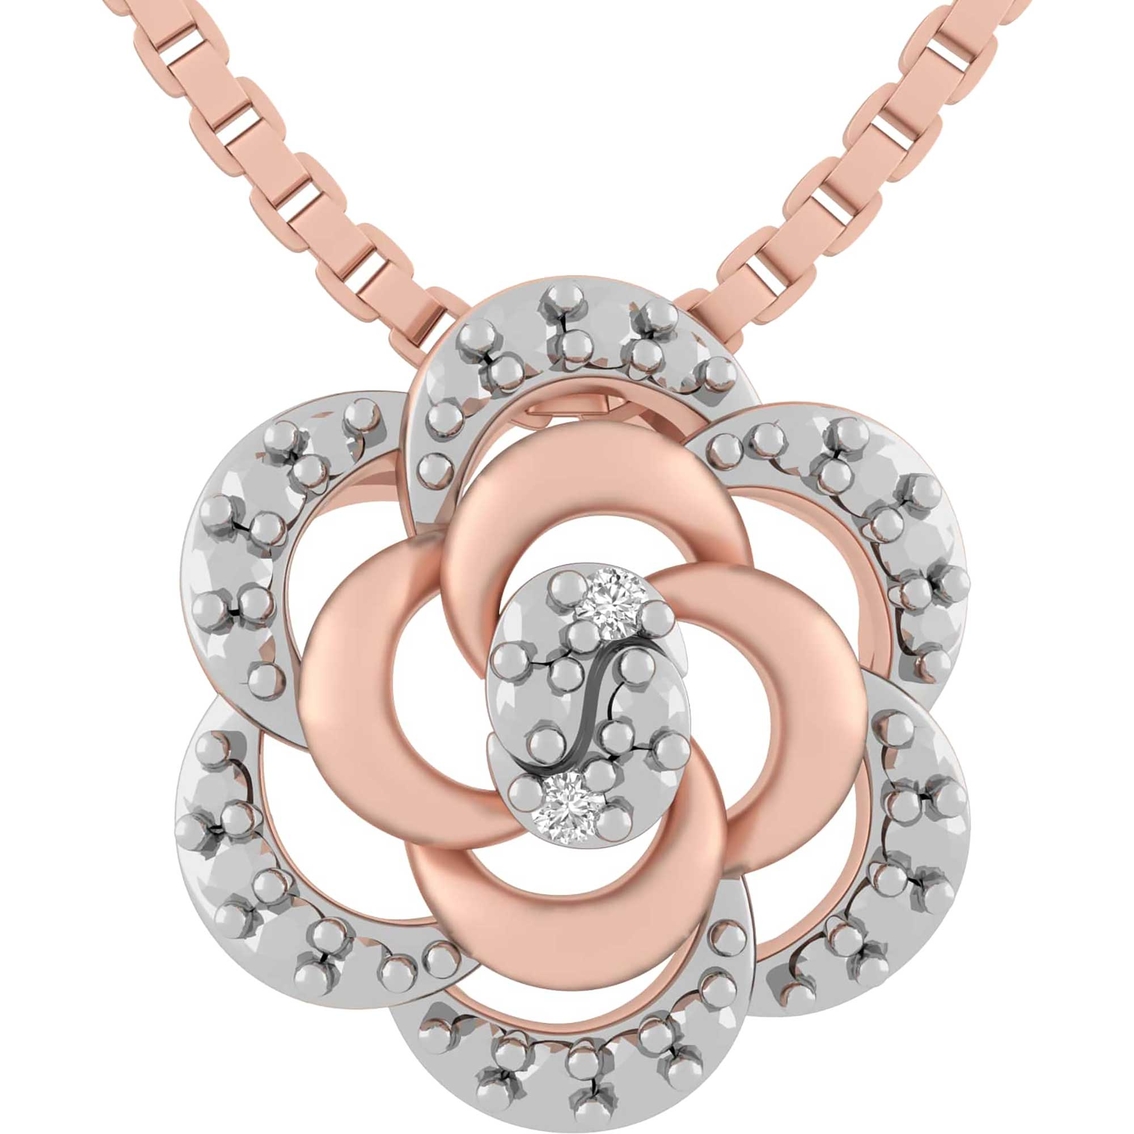 Sterling Silver 10K Rose Goldtone Diamond Accent Earrings and Pendant Flower Set - Image 3 of 6